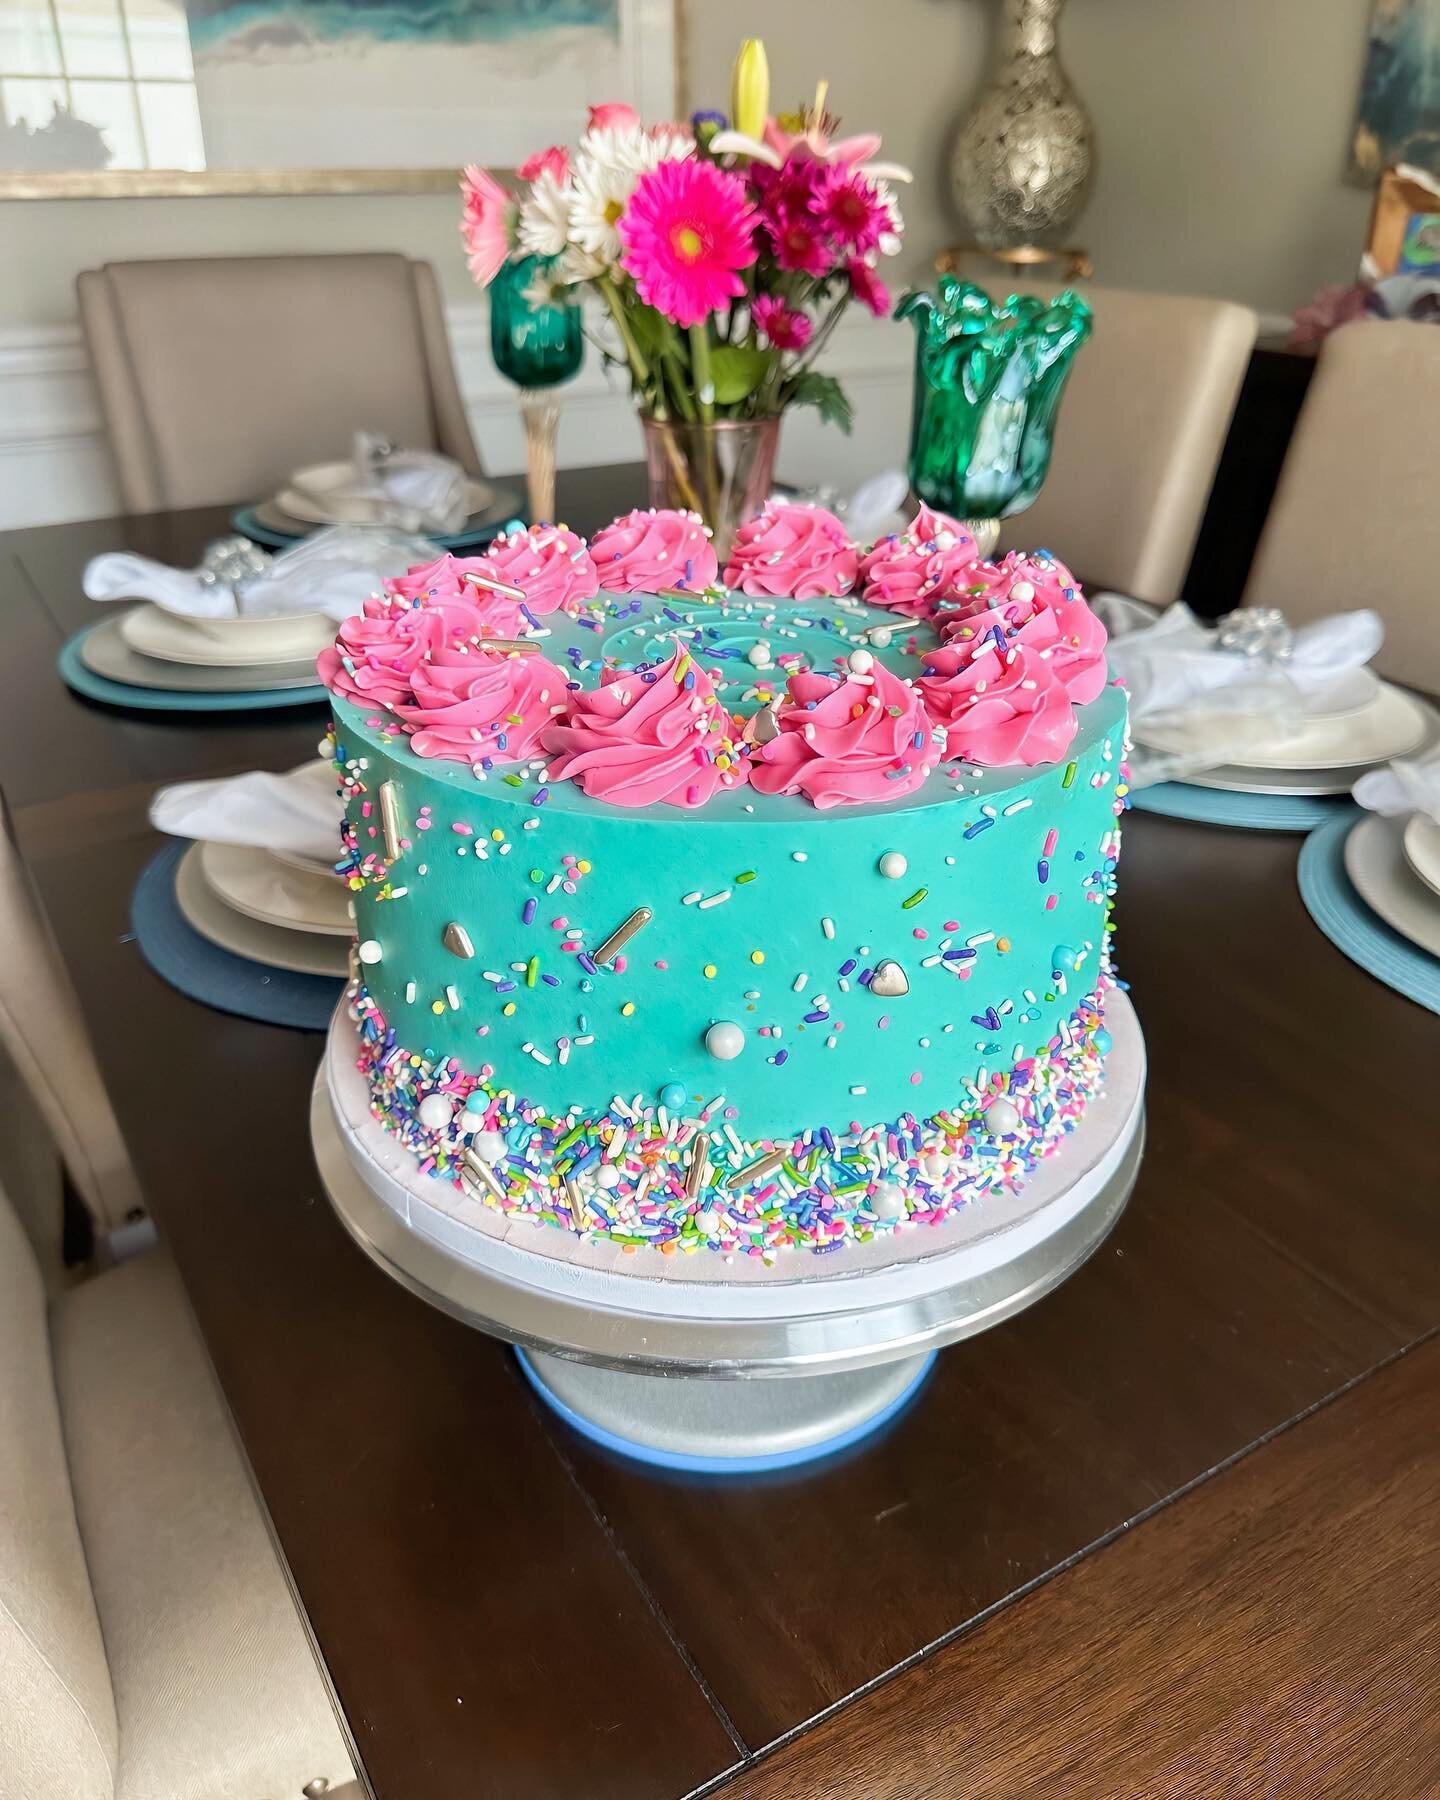 Sprinkle Cakes have never looked so glamorous! @sweetlife_bakery_official uses different sprinkle variety&rsquo;s to make the perfect sprinkle mix!😍To place your custom order click the link in our bio to fill out an order form🥳🙌
&bull;
&bull;
&bul